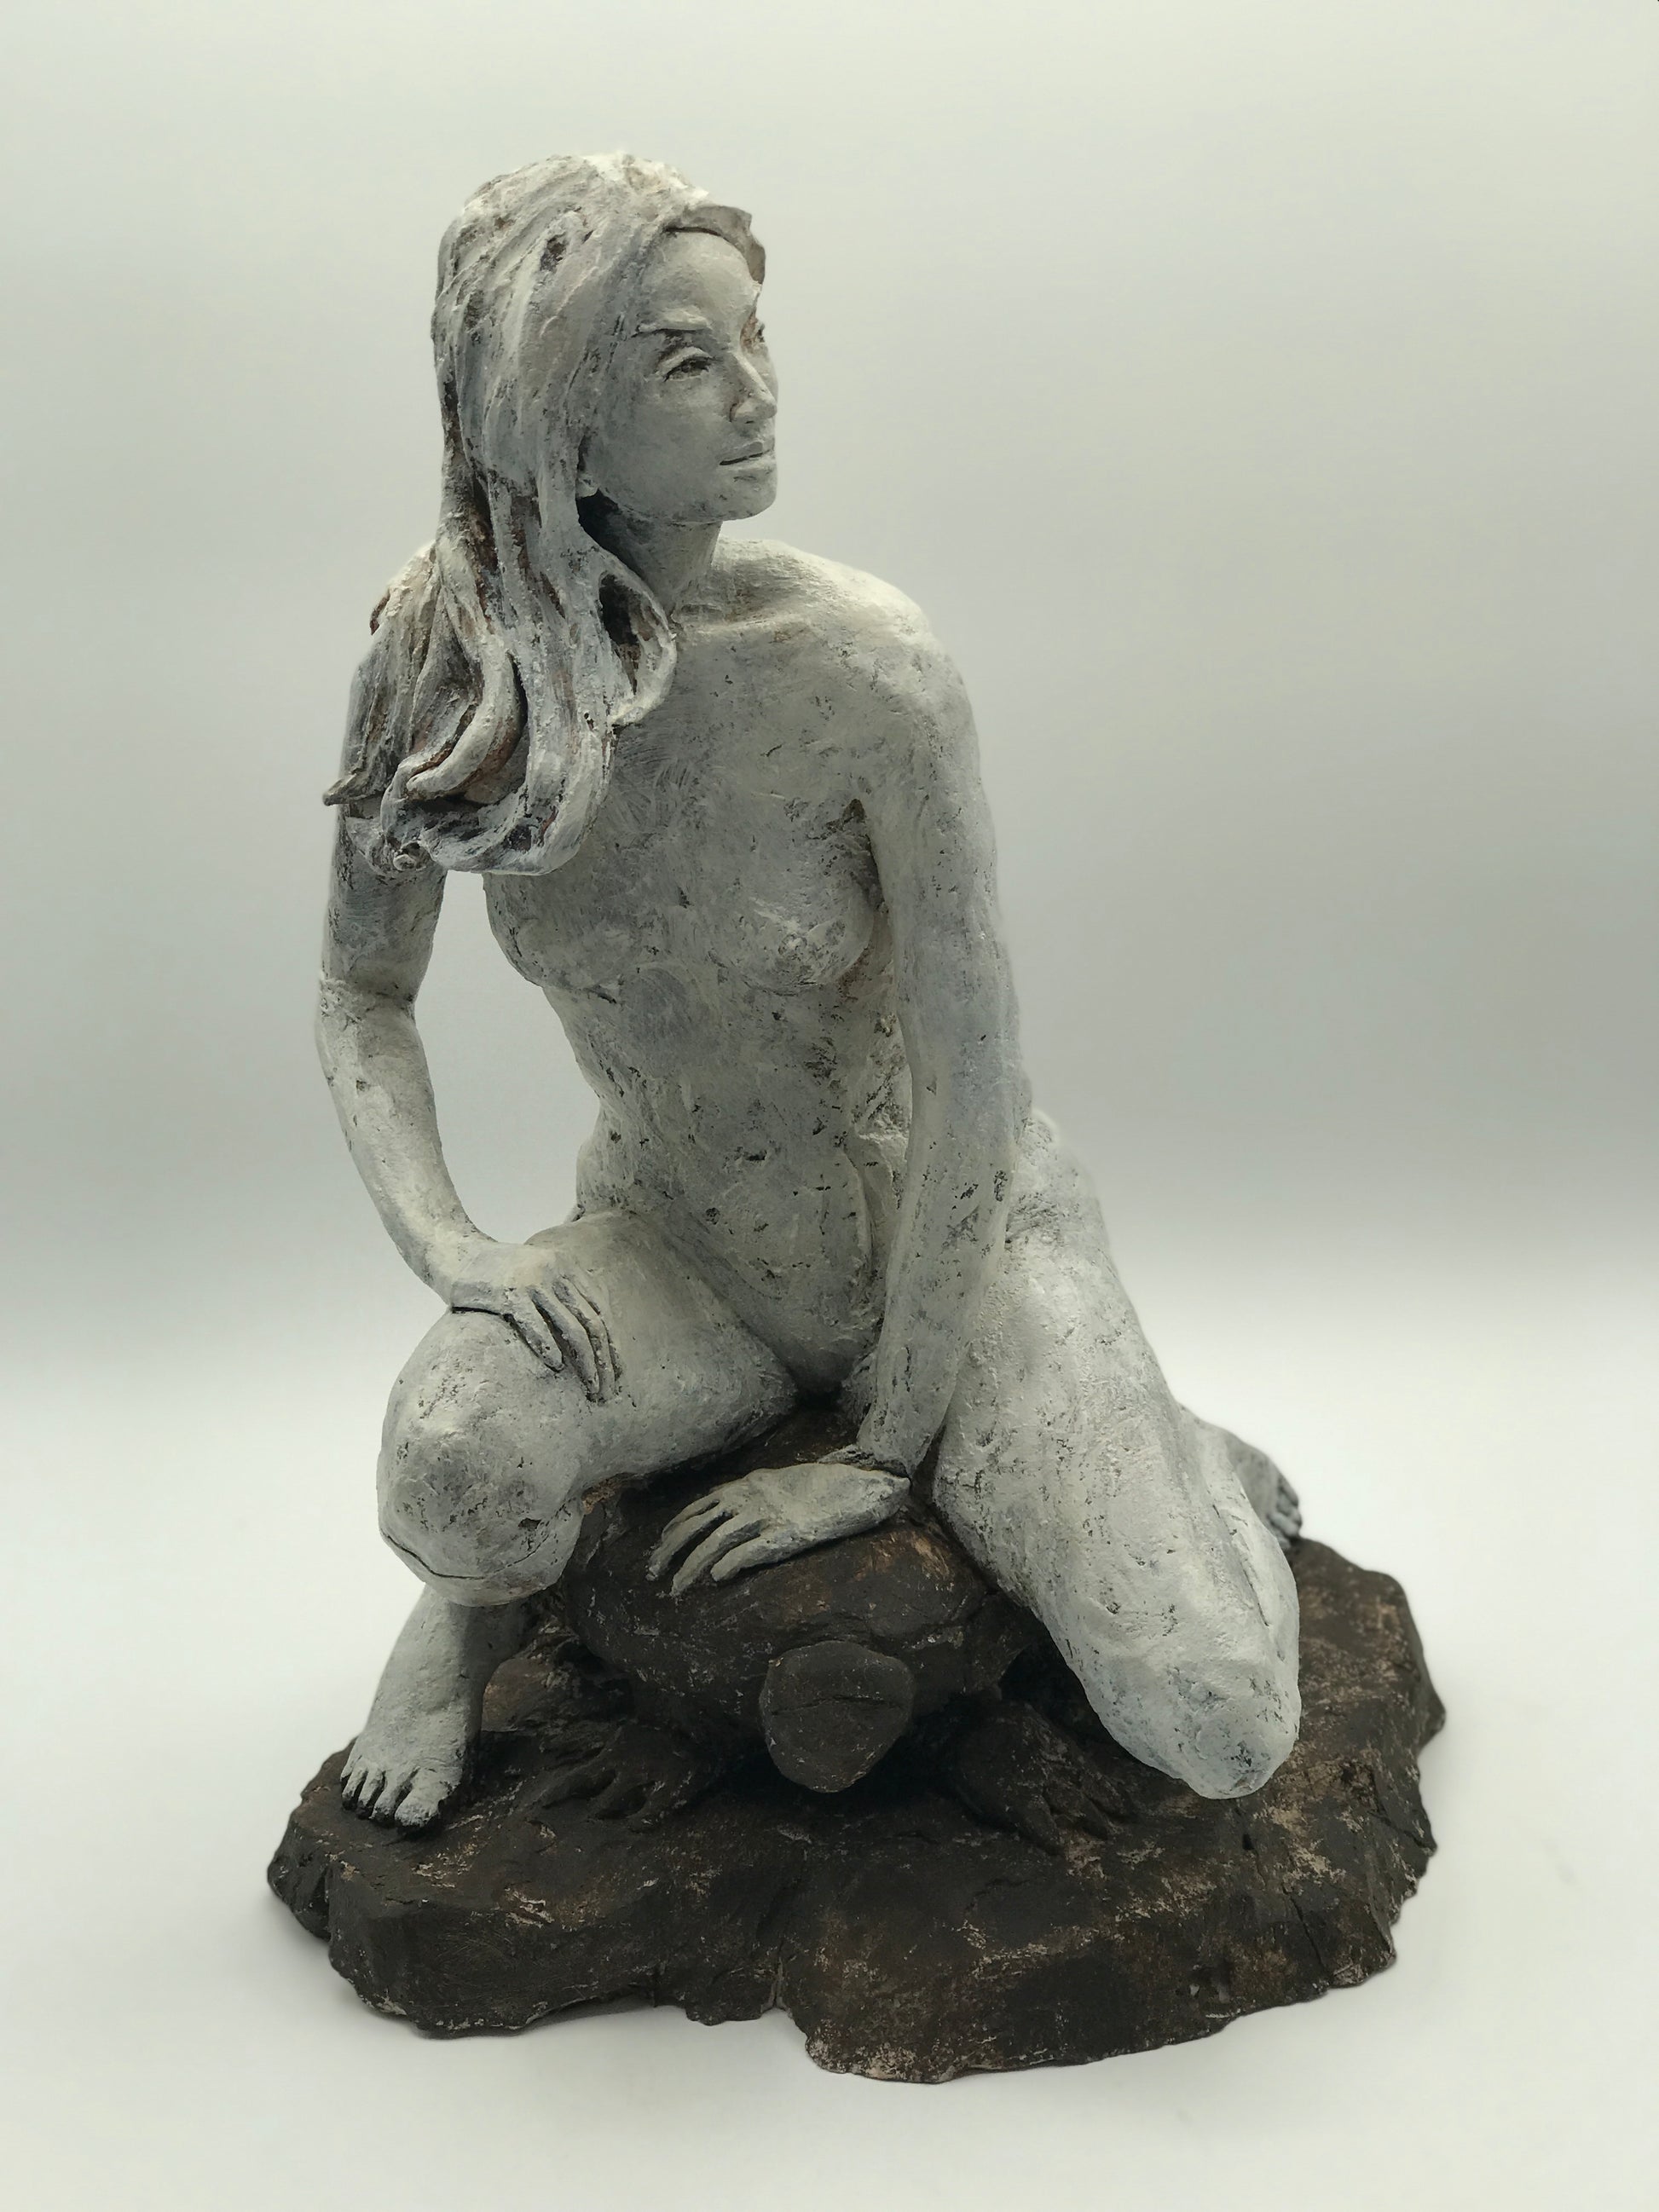 Clay figure sculpture of a woman seated on a turtle